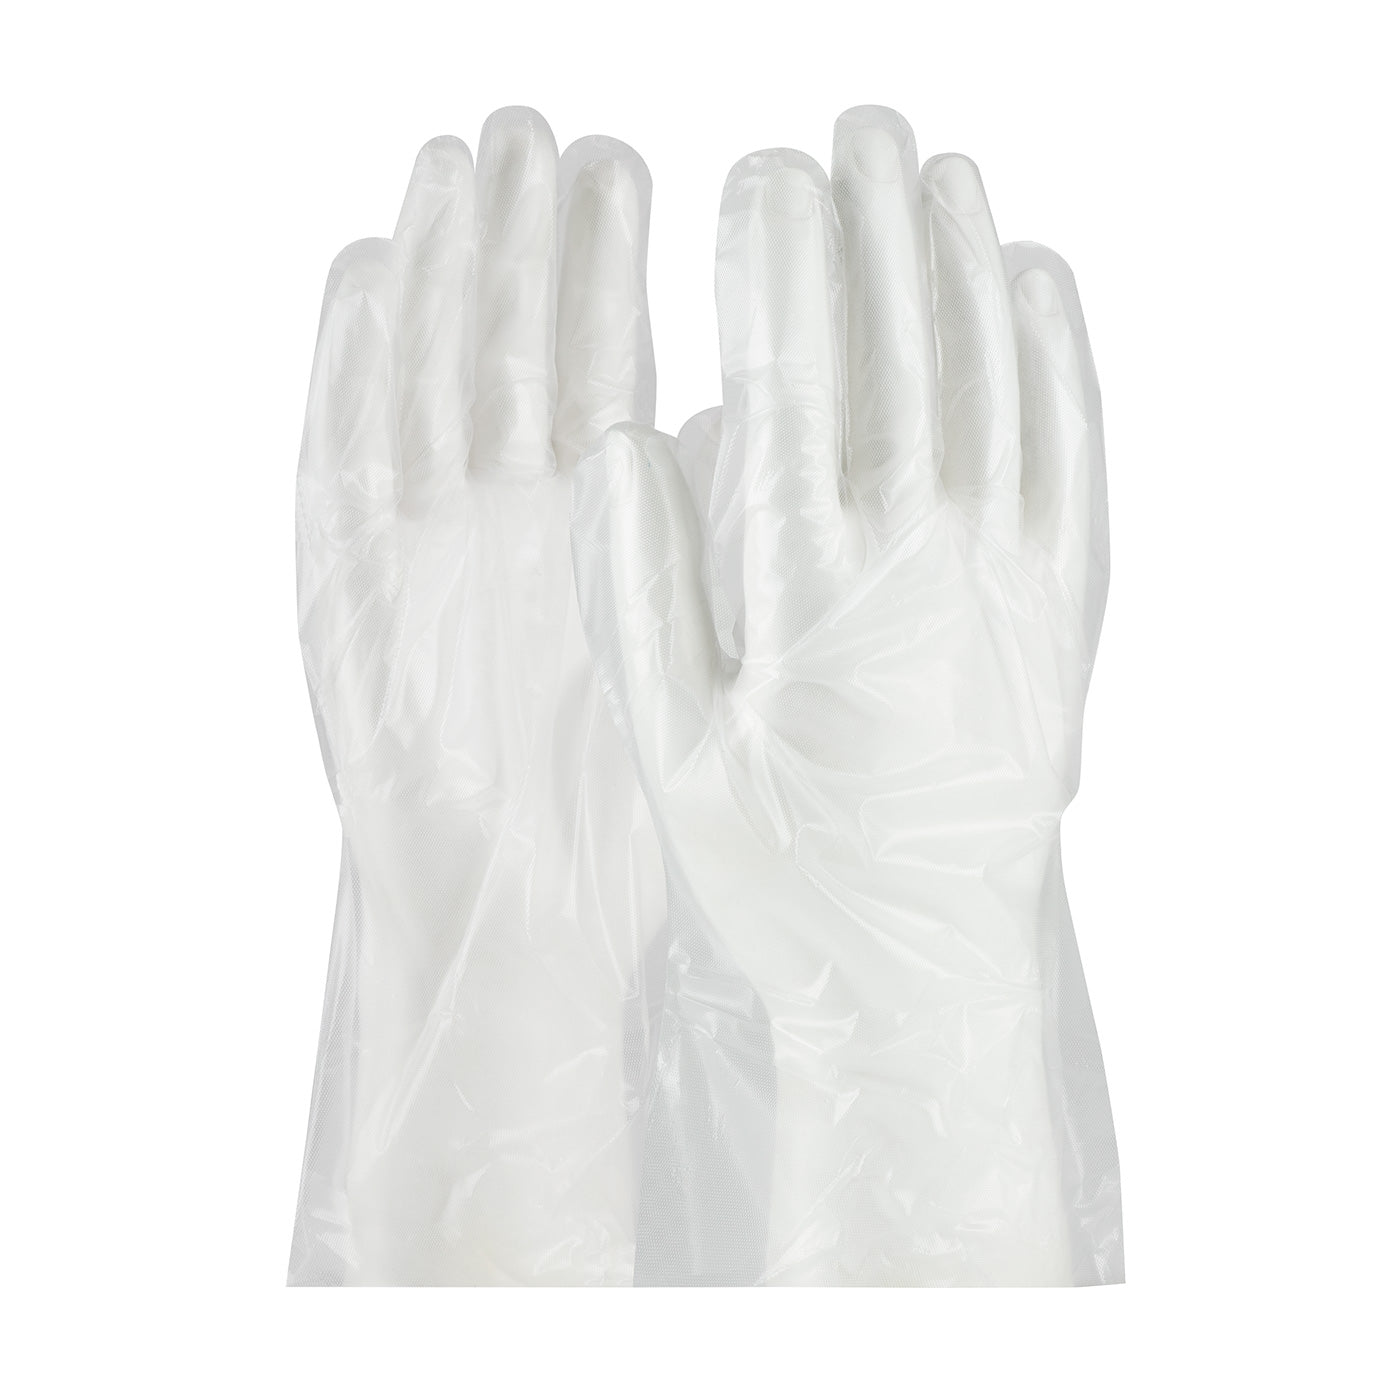 Ambi-dex 65-553/M Food Grade Disposable Polyethylene Glove with Silky Finish Grip- Discontinued Limited Quantities Available